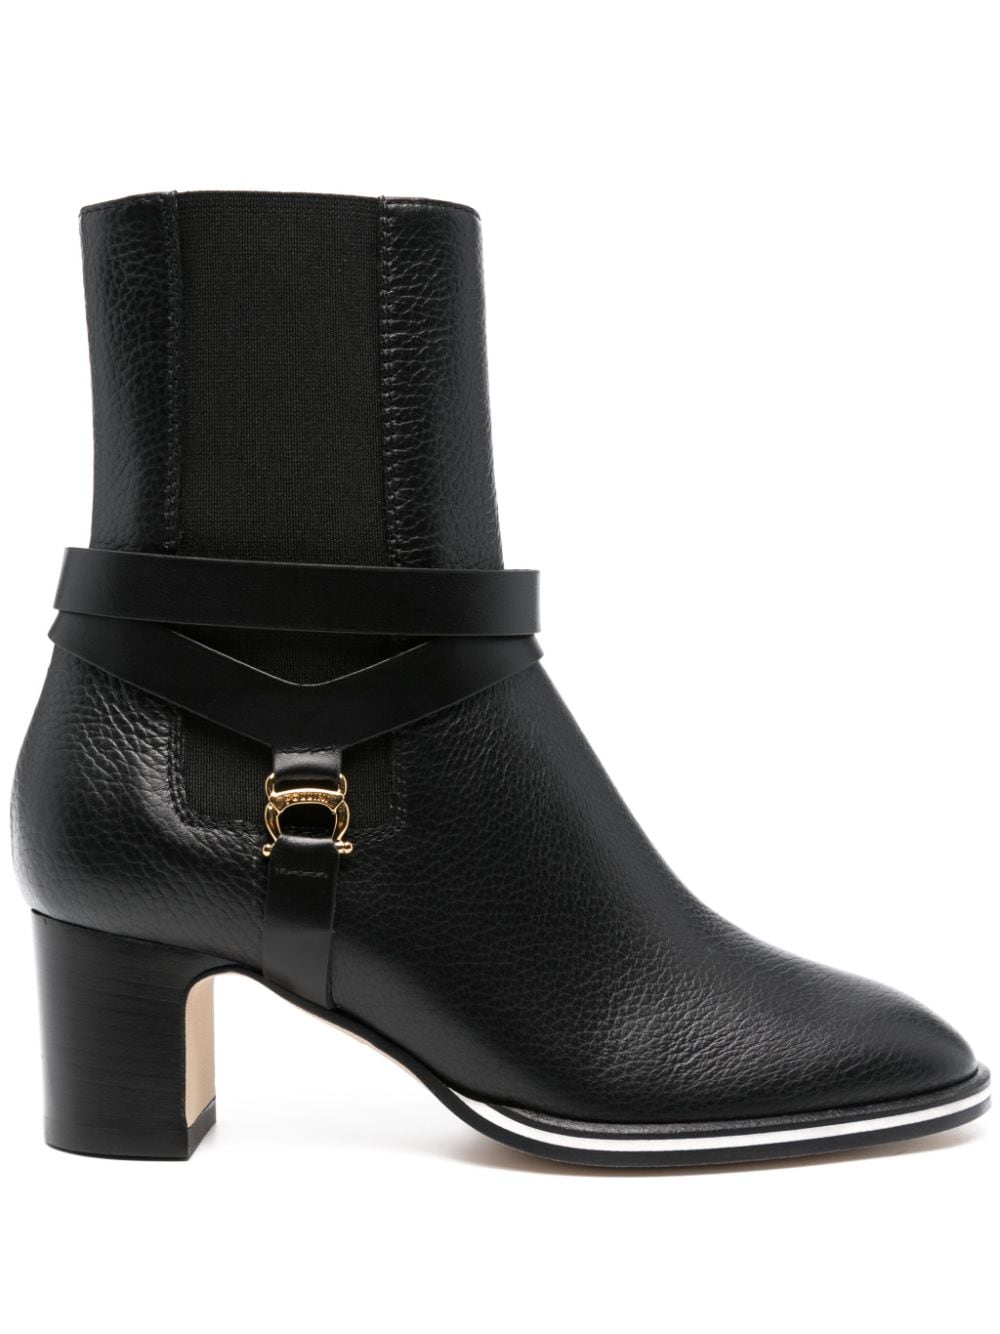 Pollini Saddle 60mm Leather Boots In Black